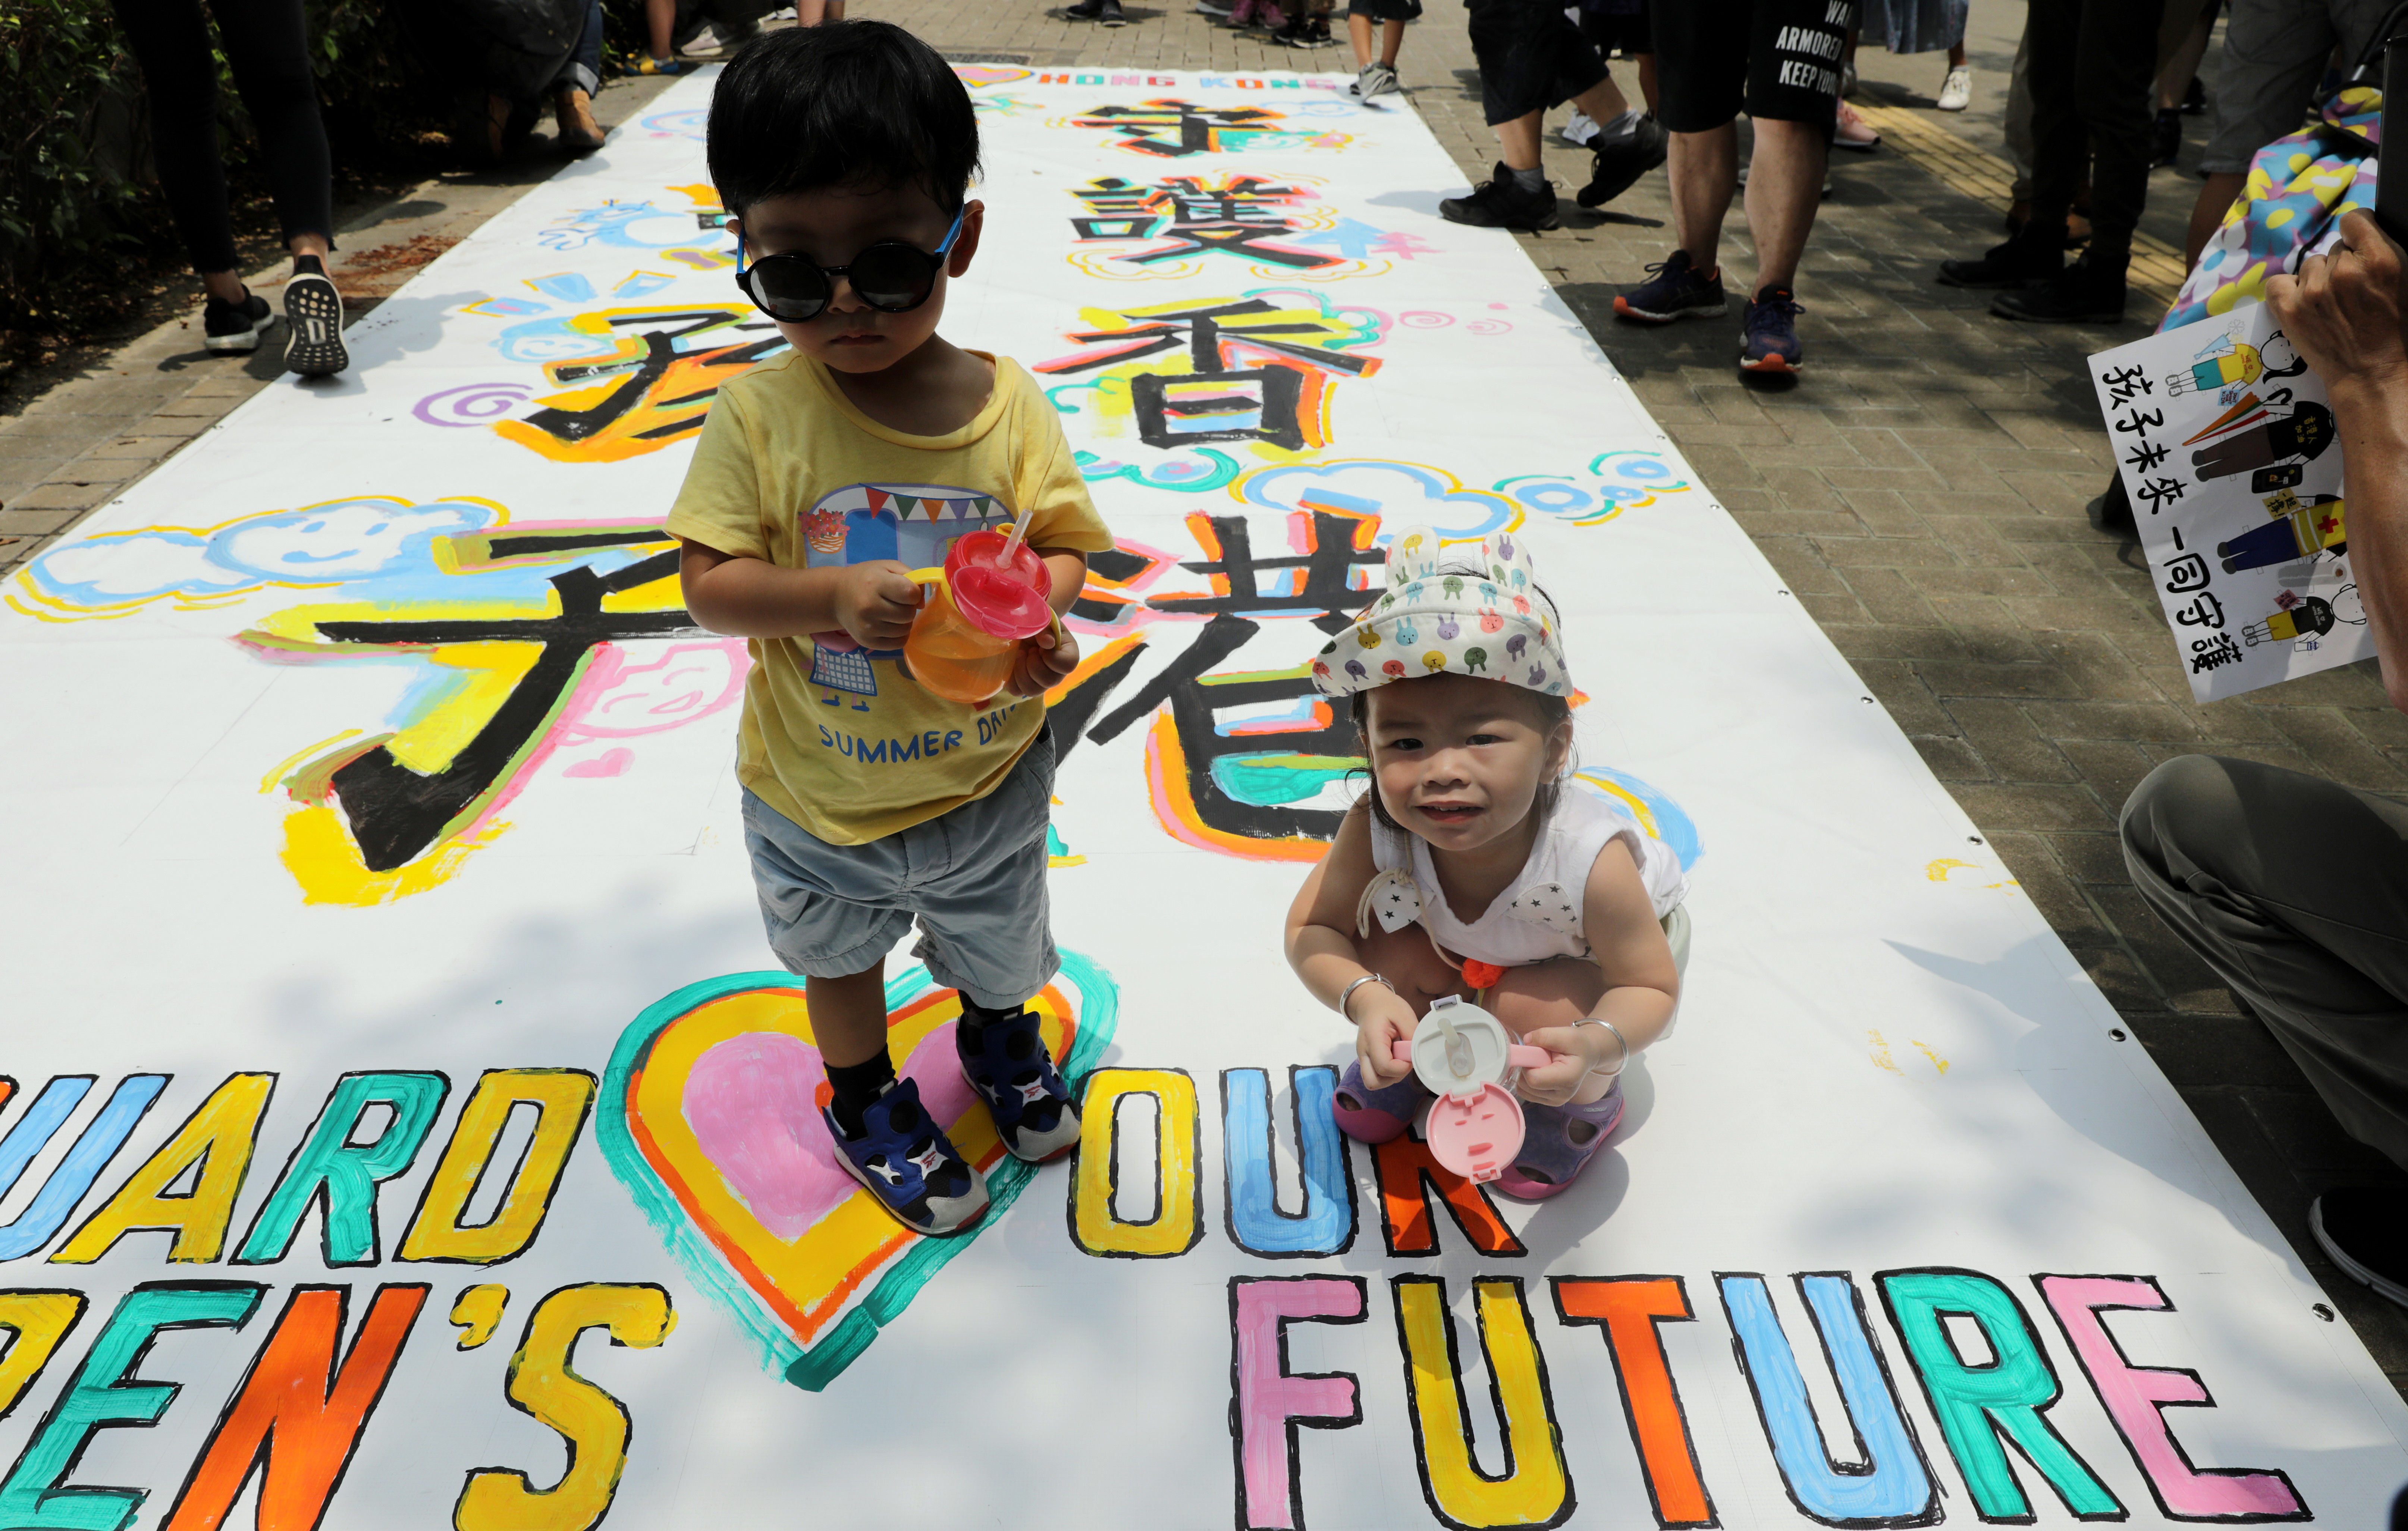 Youngsters at the “Protect Children’s Future” rally in Hong Kong on August 10. Half a million students with a grouse come packaged with a million parents. Photo: May Tse